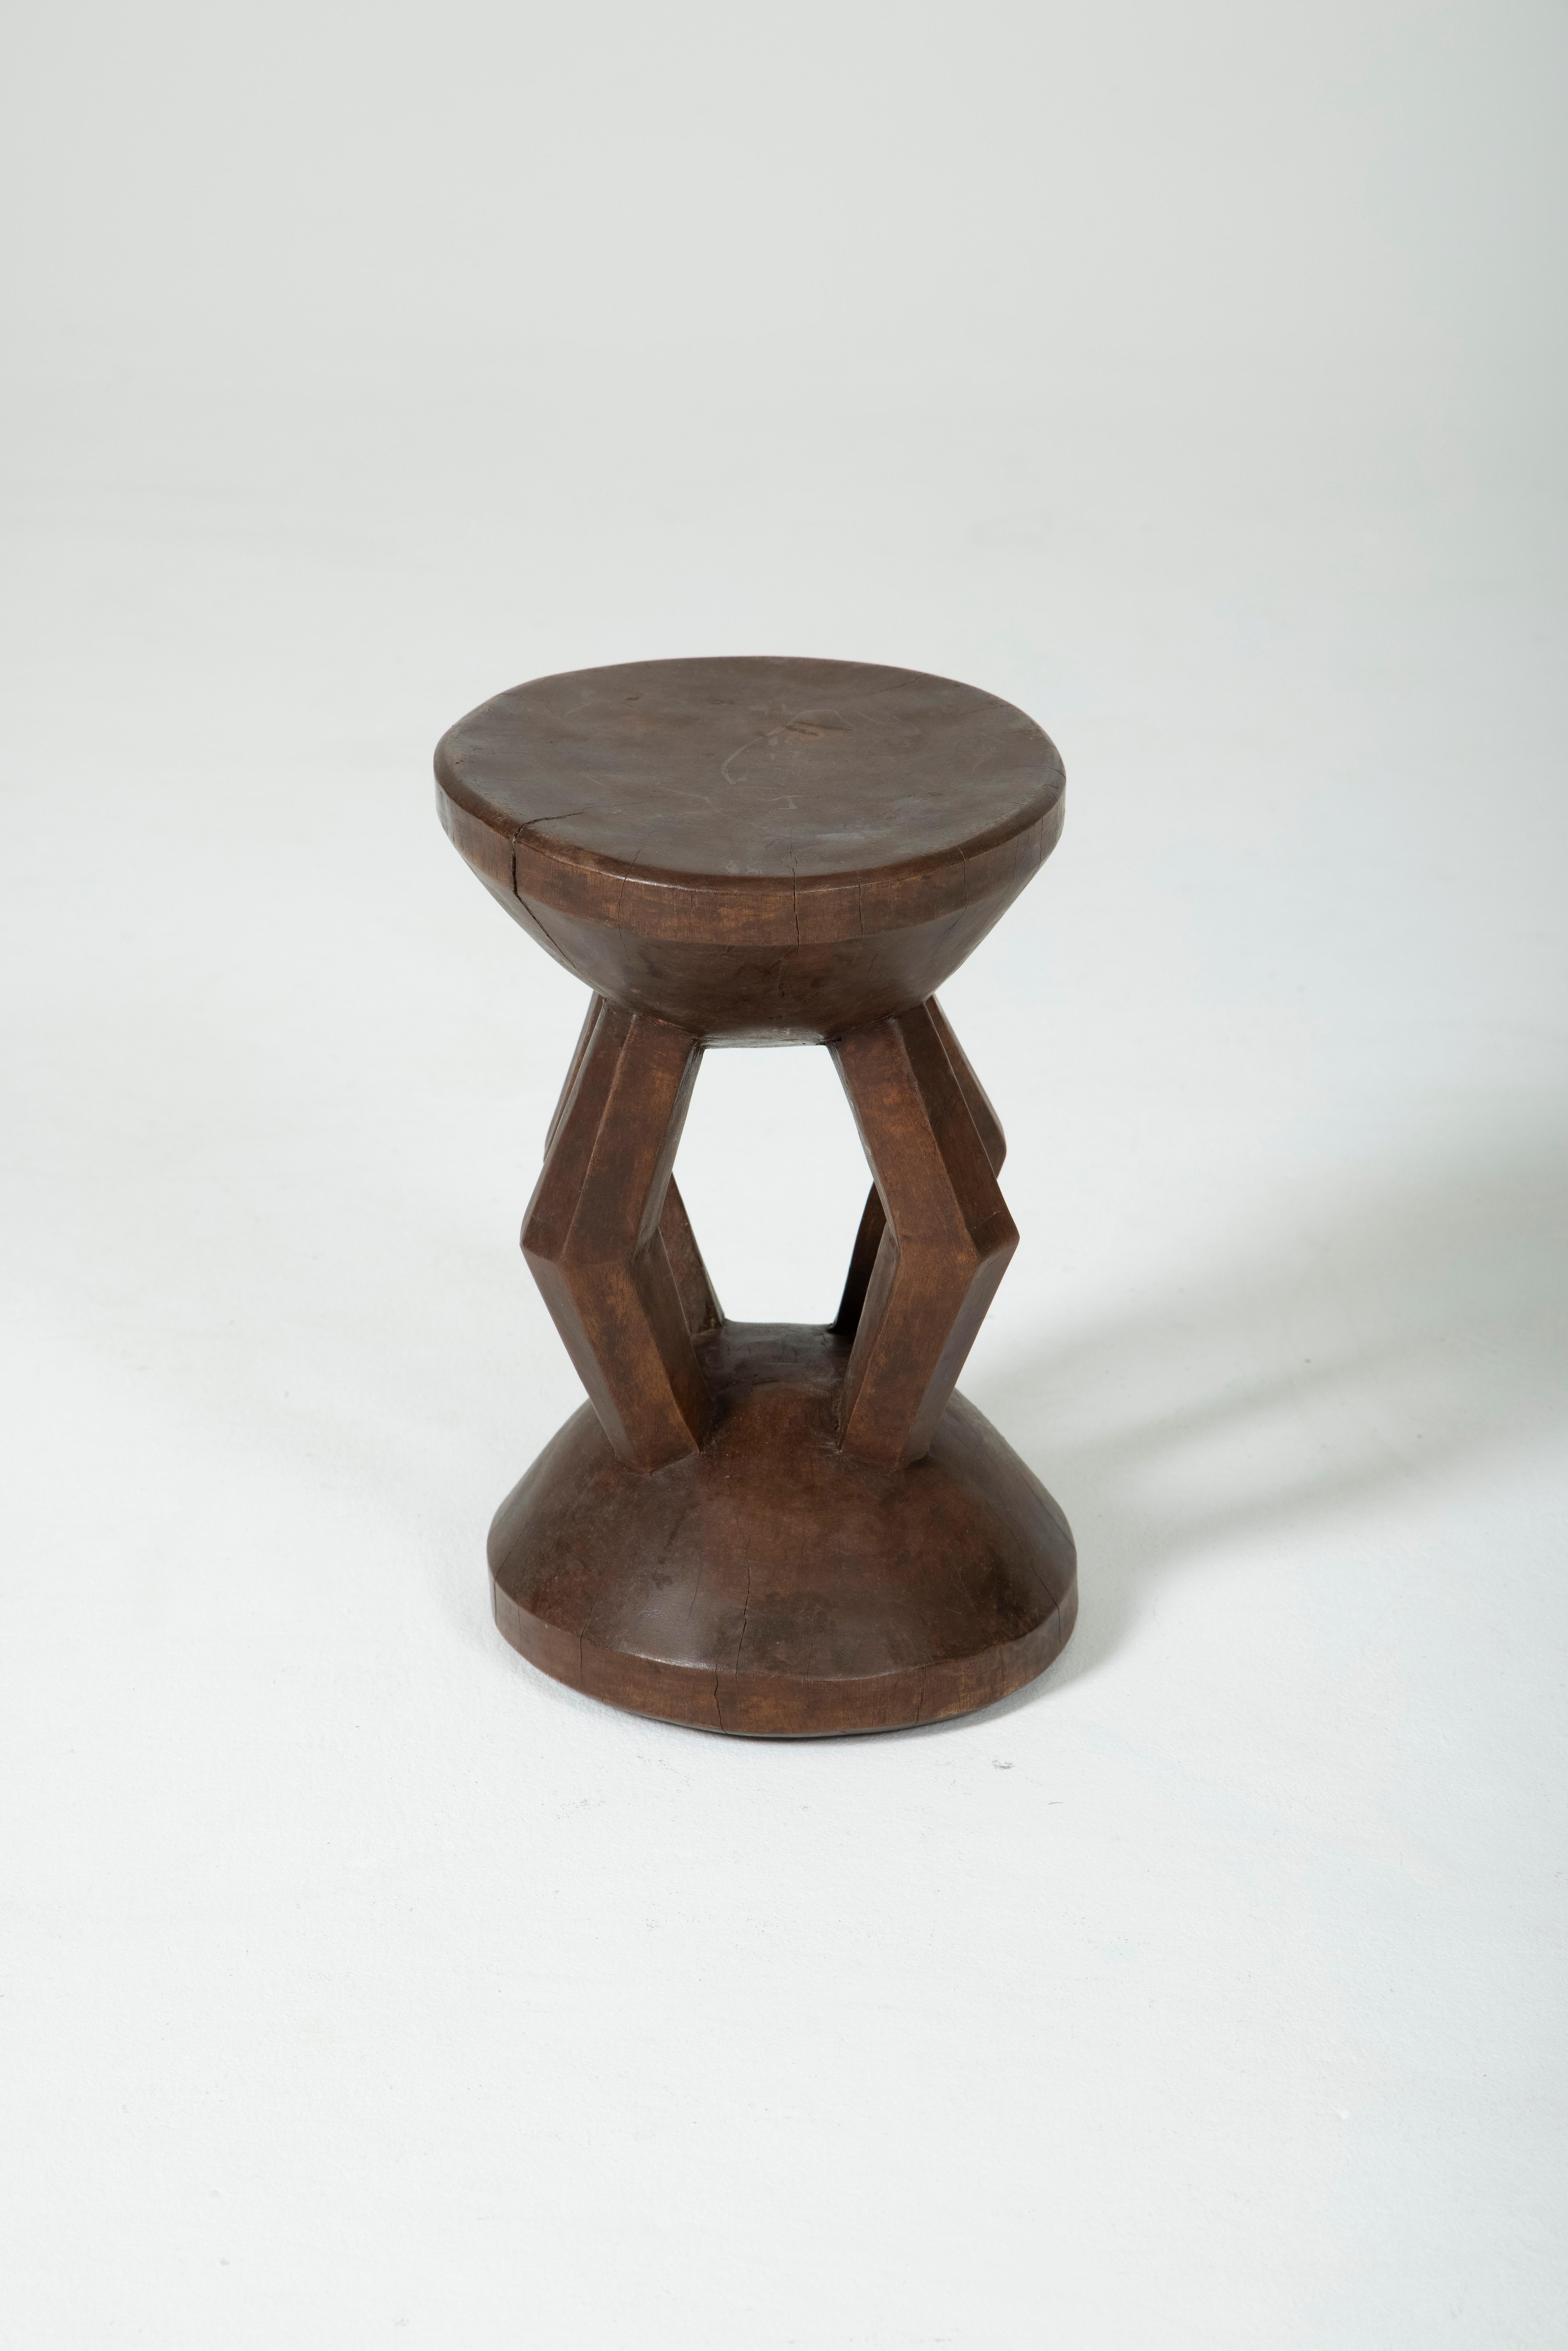 Ivorian Stool or Side Table Dogon